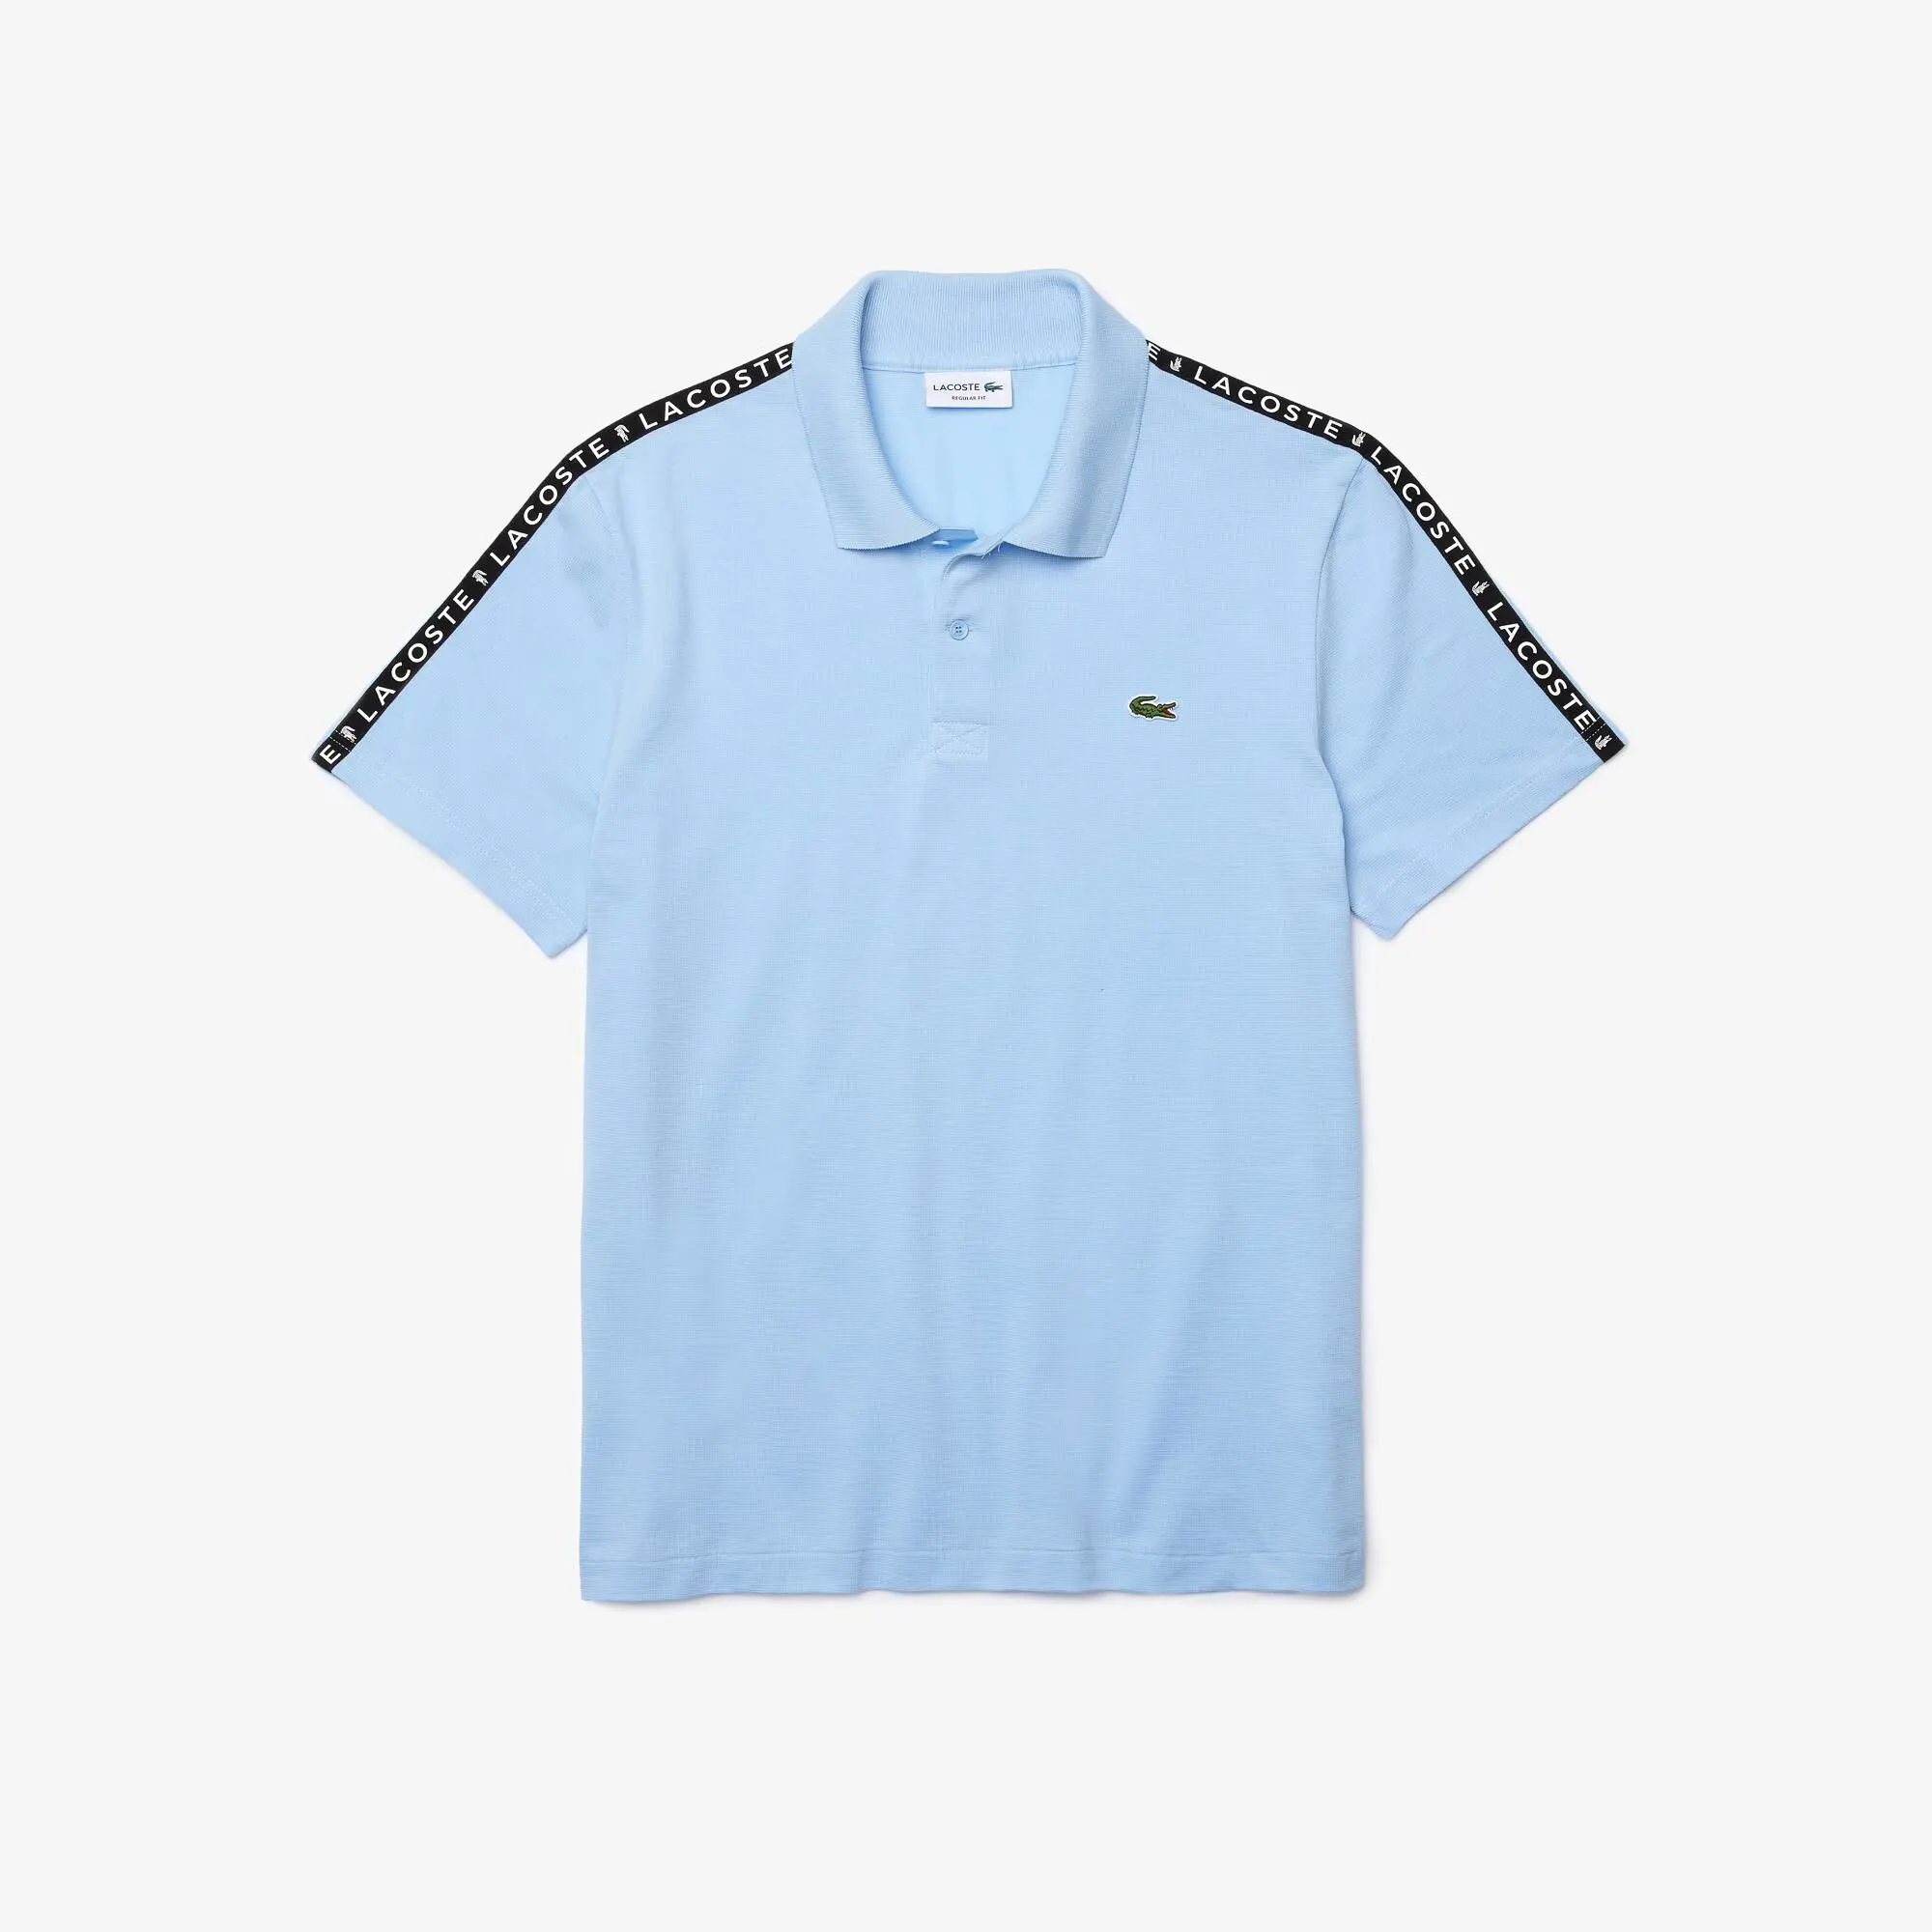 Lacoste Men's Lettered Band Ultra-Lightweight Cotton Polo. 2